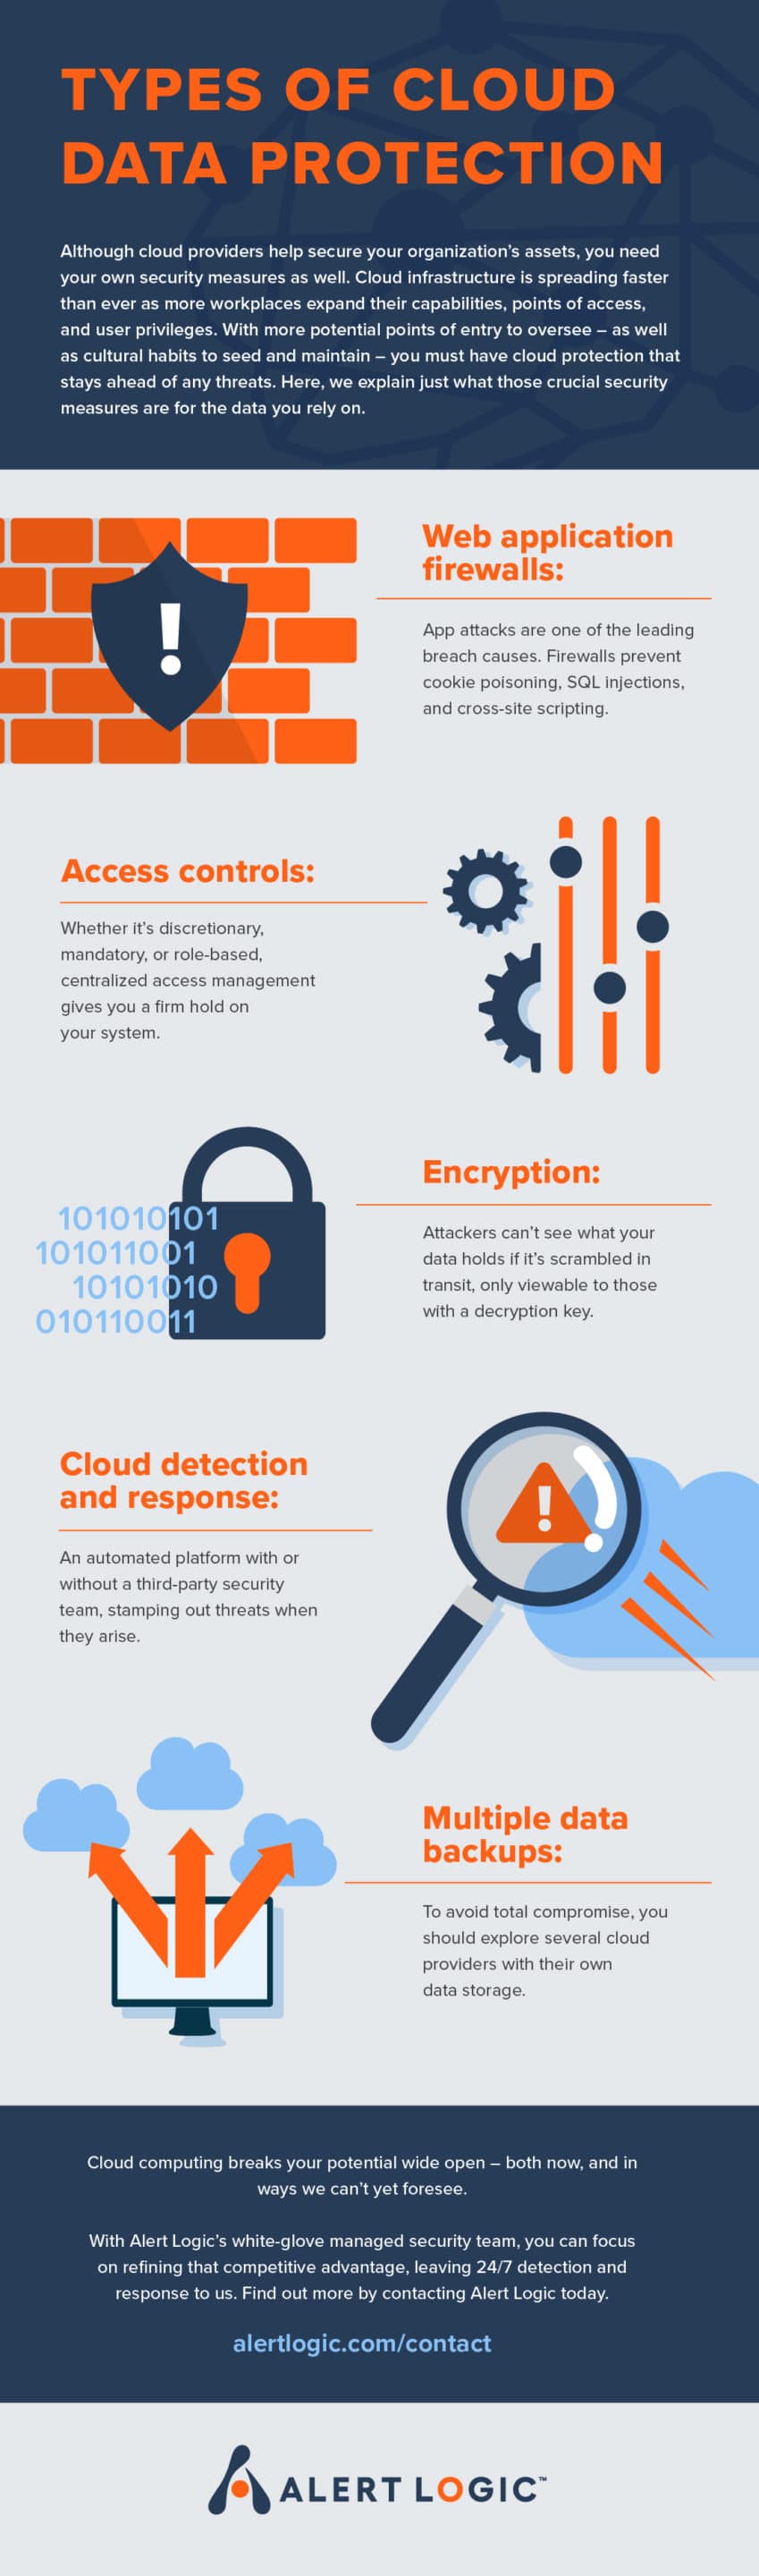 Types of Cloud Data Protection Infographic